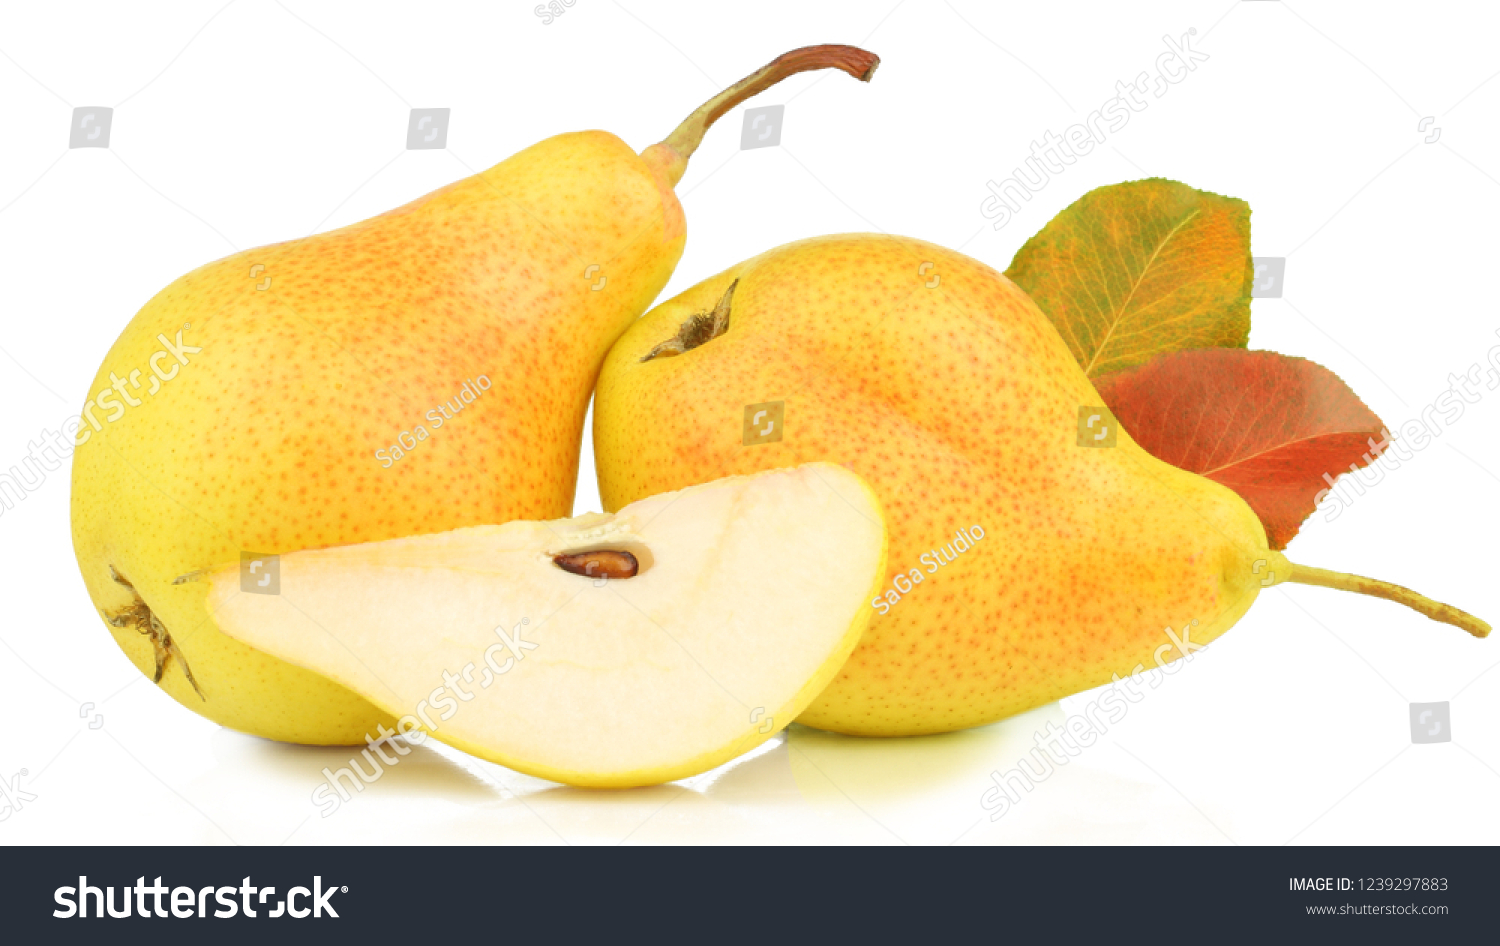 Yellow pears with autumn leaves isolated on white background. #1239297883